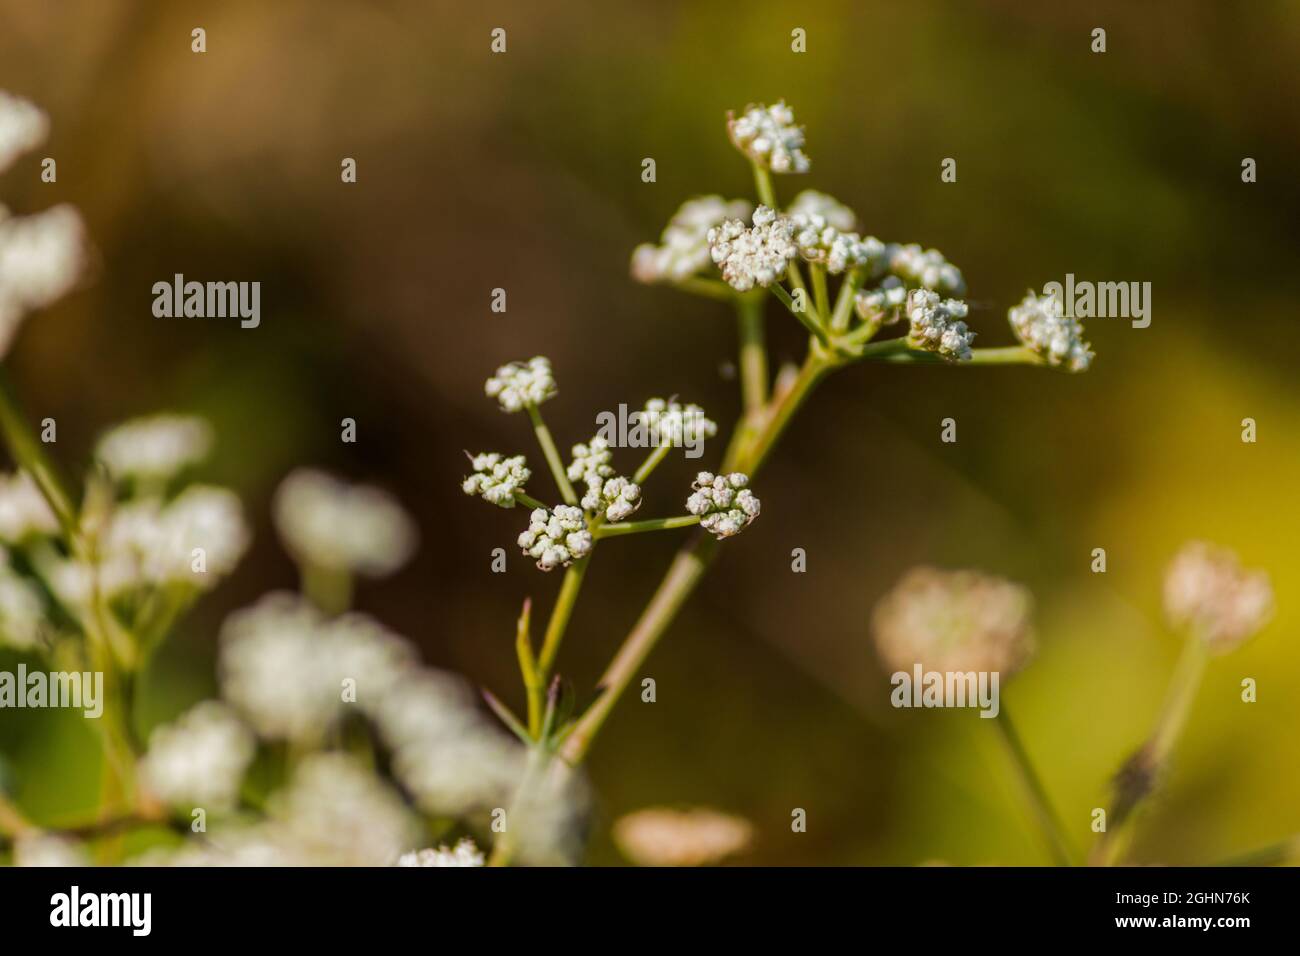 Small flowers of poisonous hemlock on a green natural background. Stock Photo